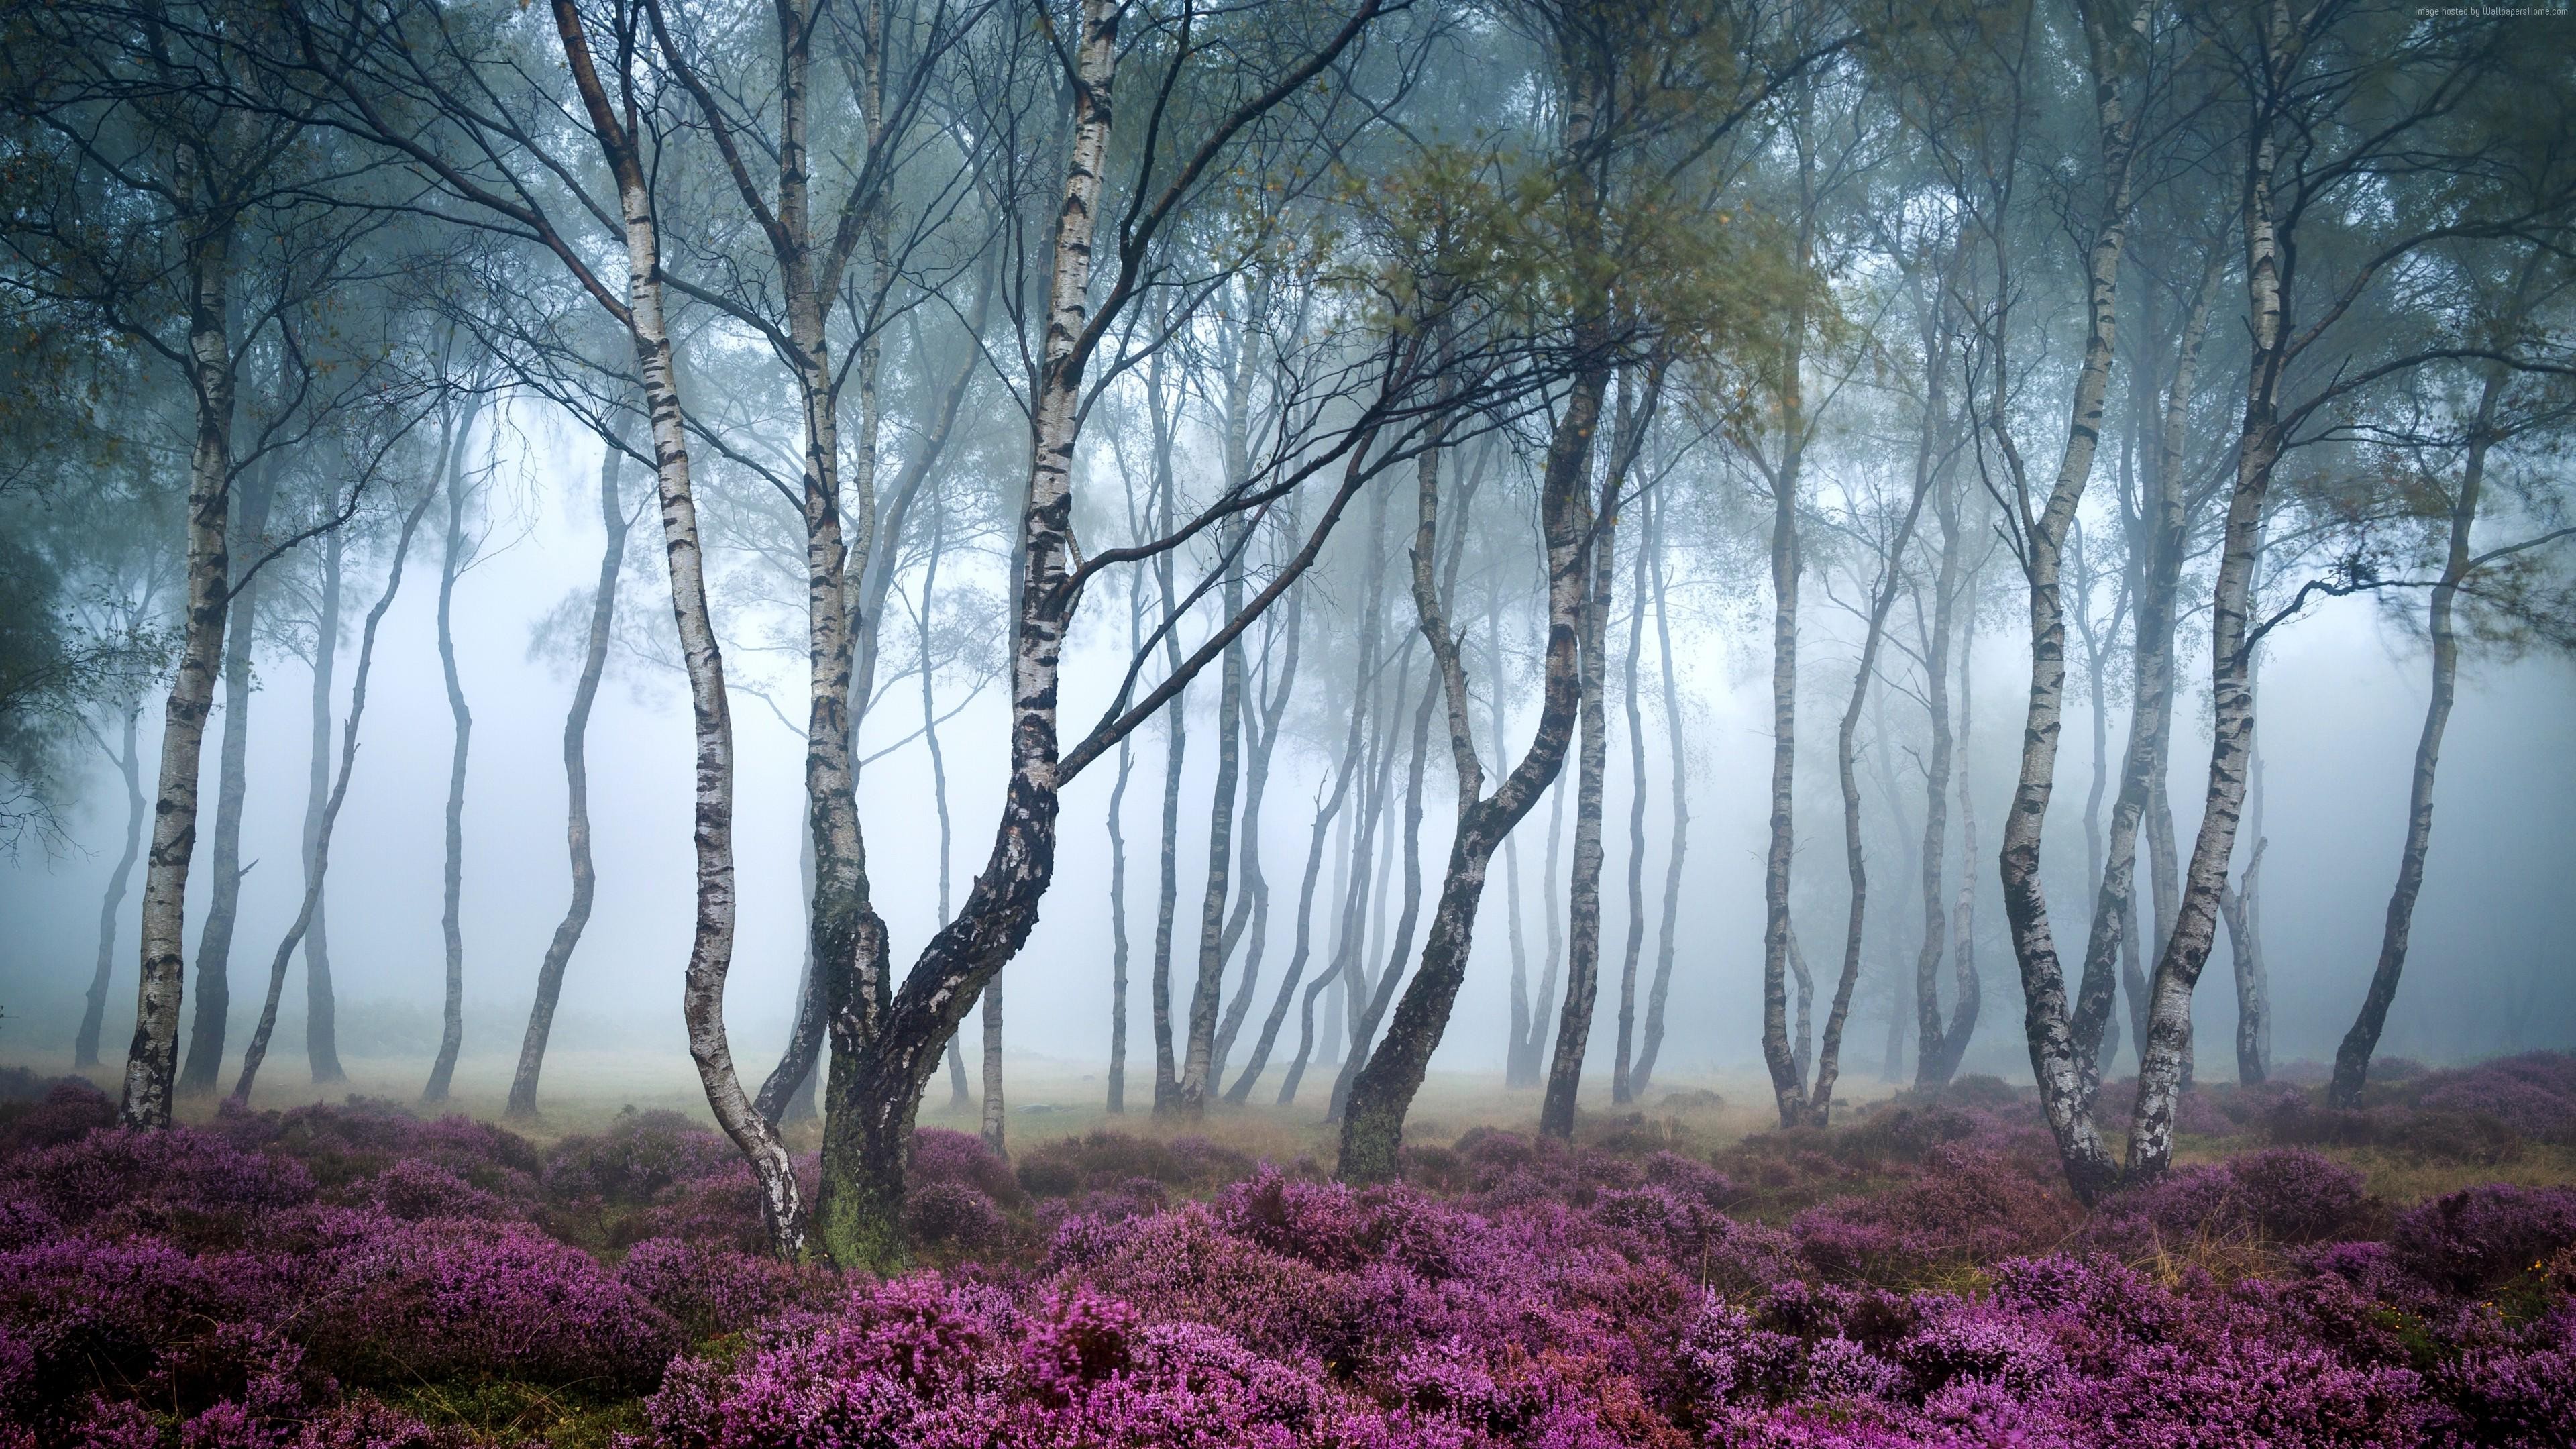 General 3840x2160 nature forest mist flowers pink trees birch